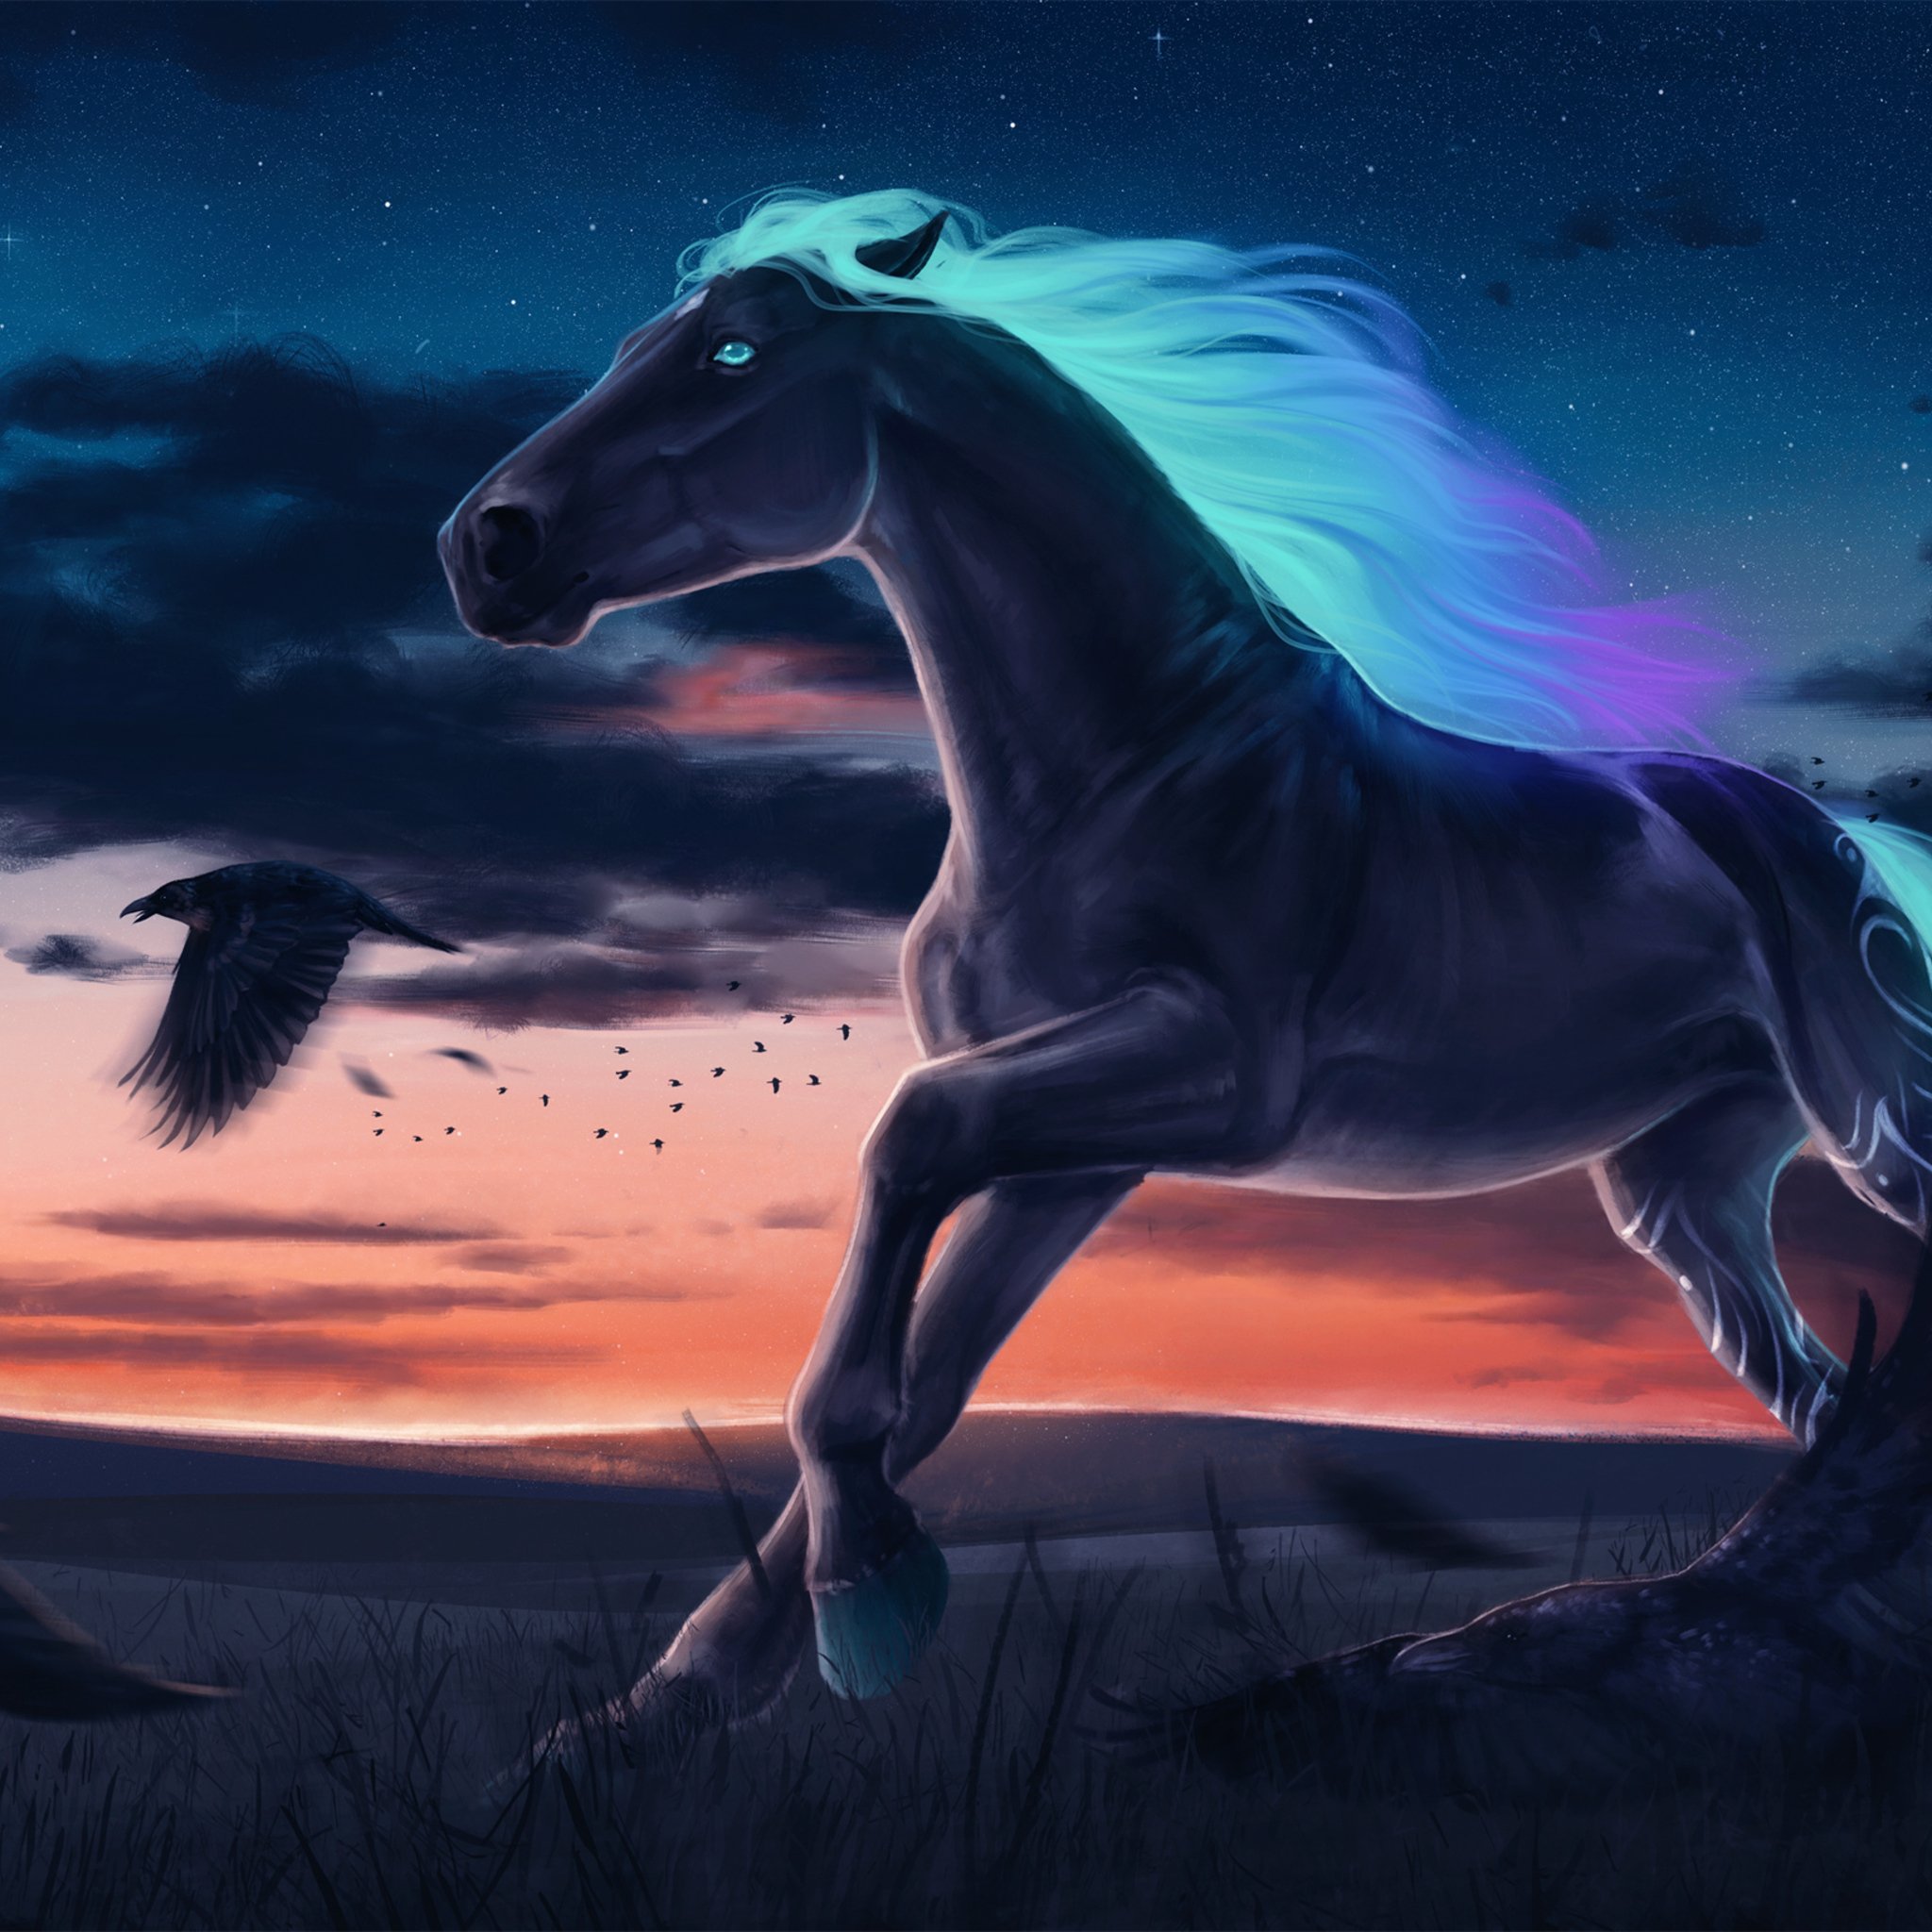 Horse Magic Moon Digital Art iPad Air HD 4k Wallpaper, Image, Background, Photo and Picture